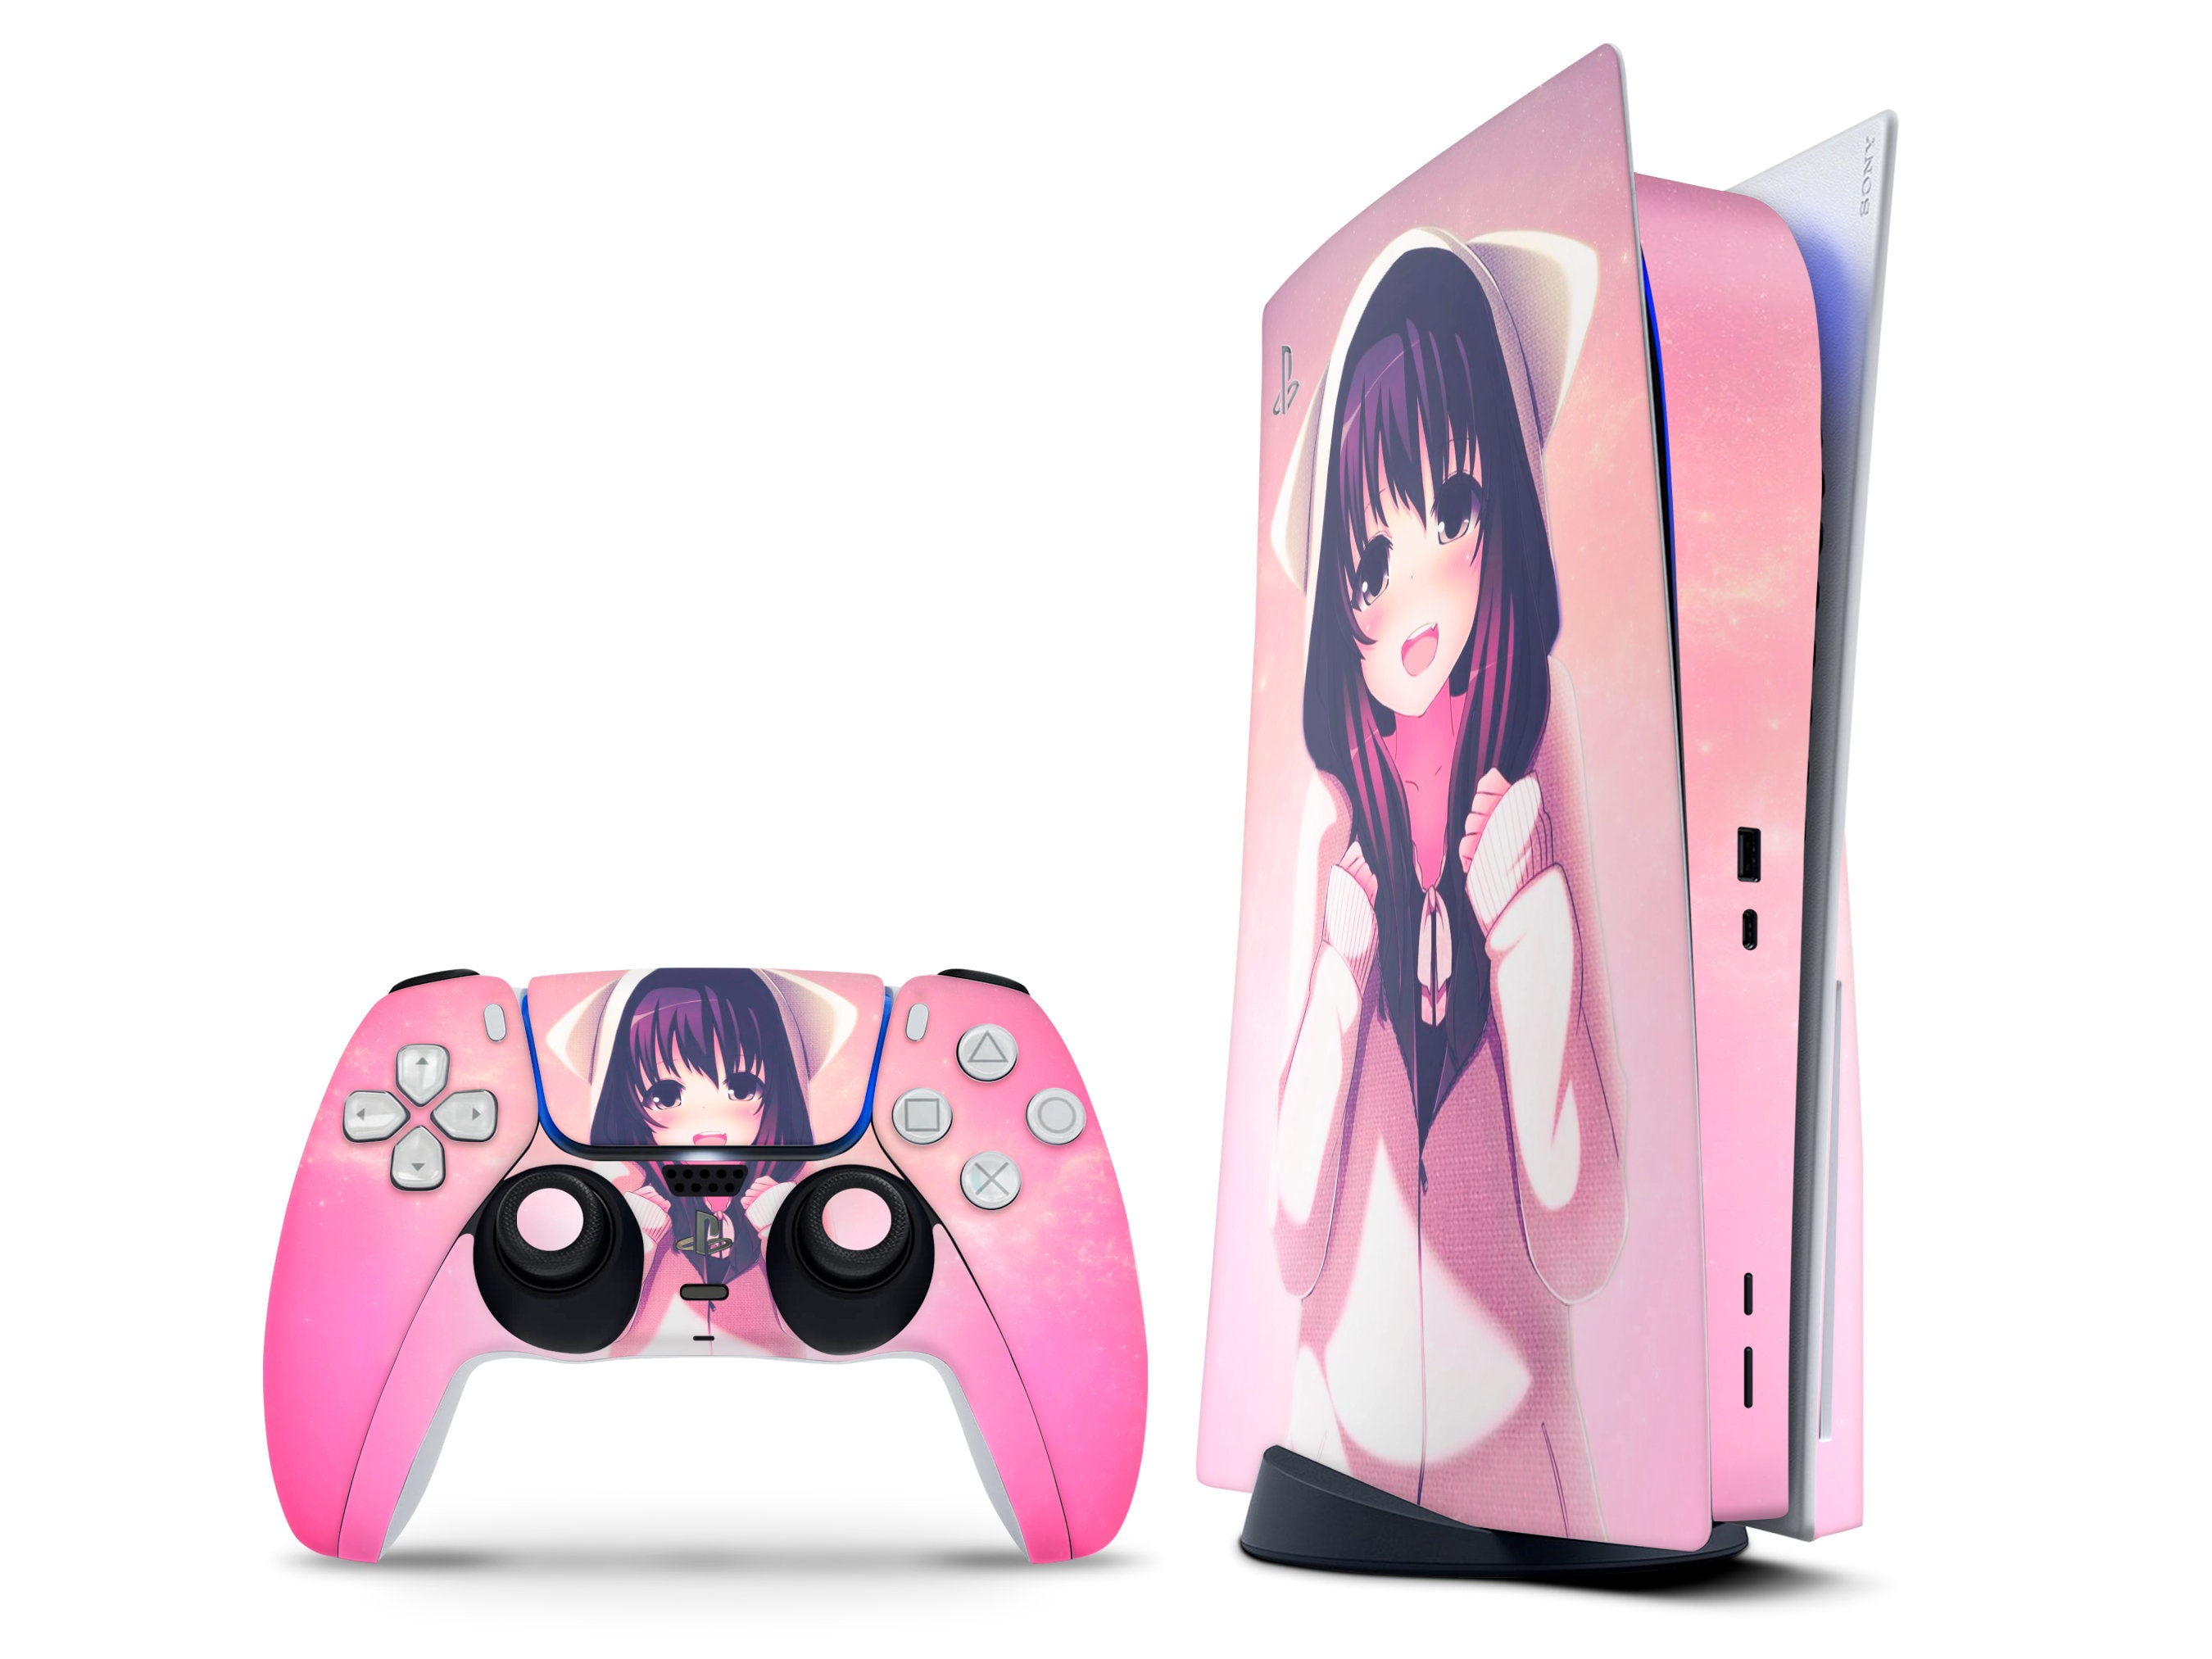 Anime Girl PS5 Console and Controller Skin Cute Pastel Pink pic picture picture